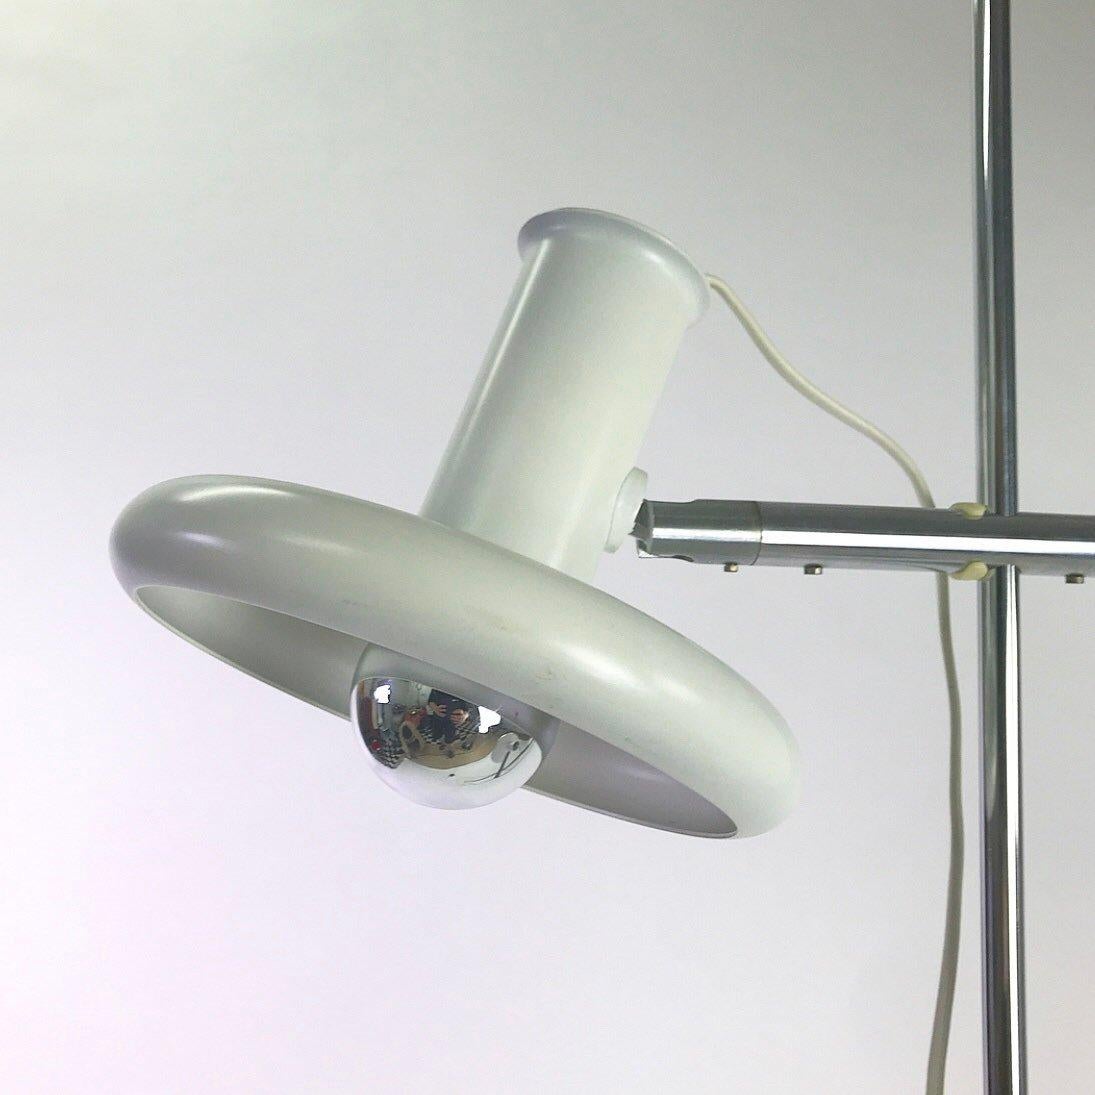 Classic Nordic design by Hans Due for Fog & Mørup, 1972, Denmark.

The model is called Optima and comes as ceiling light, wall sconces and this beautiful floor light.

With two light sources which are height adjustable. 

A real Scandinavian